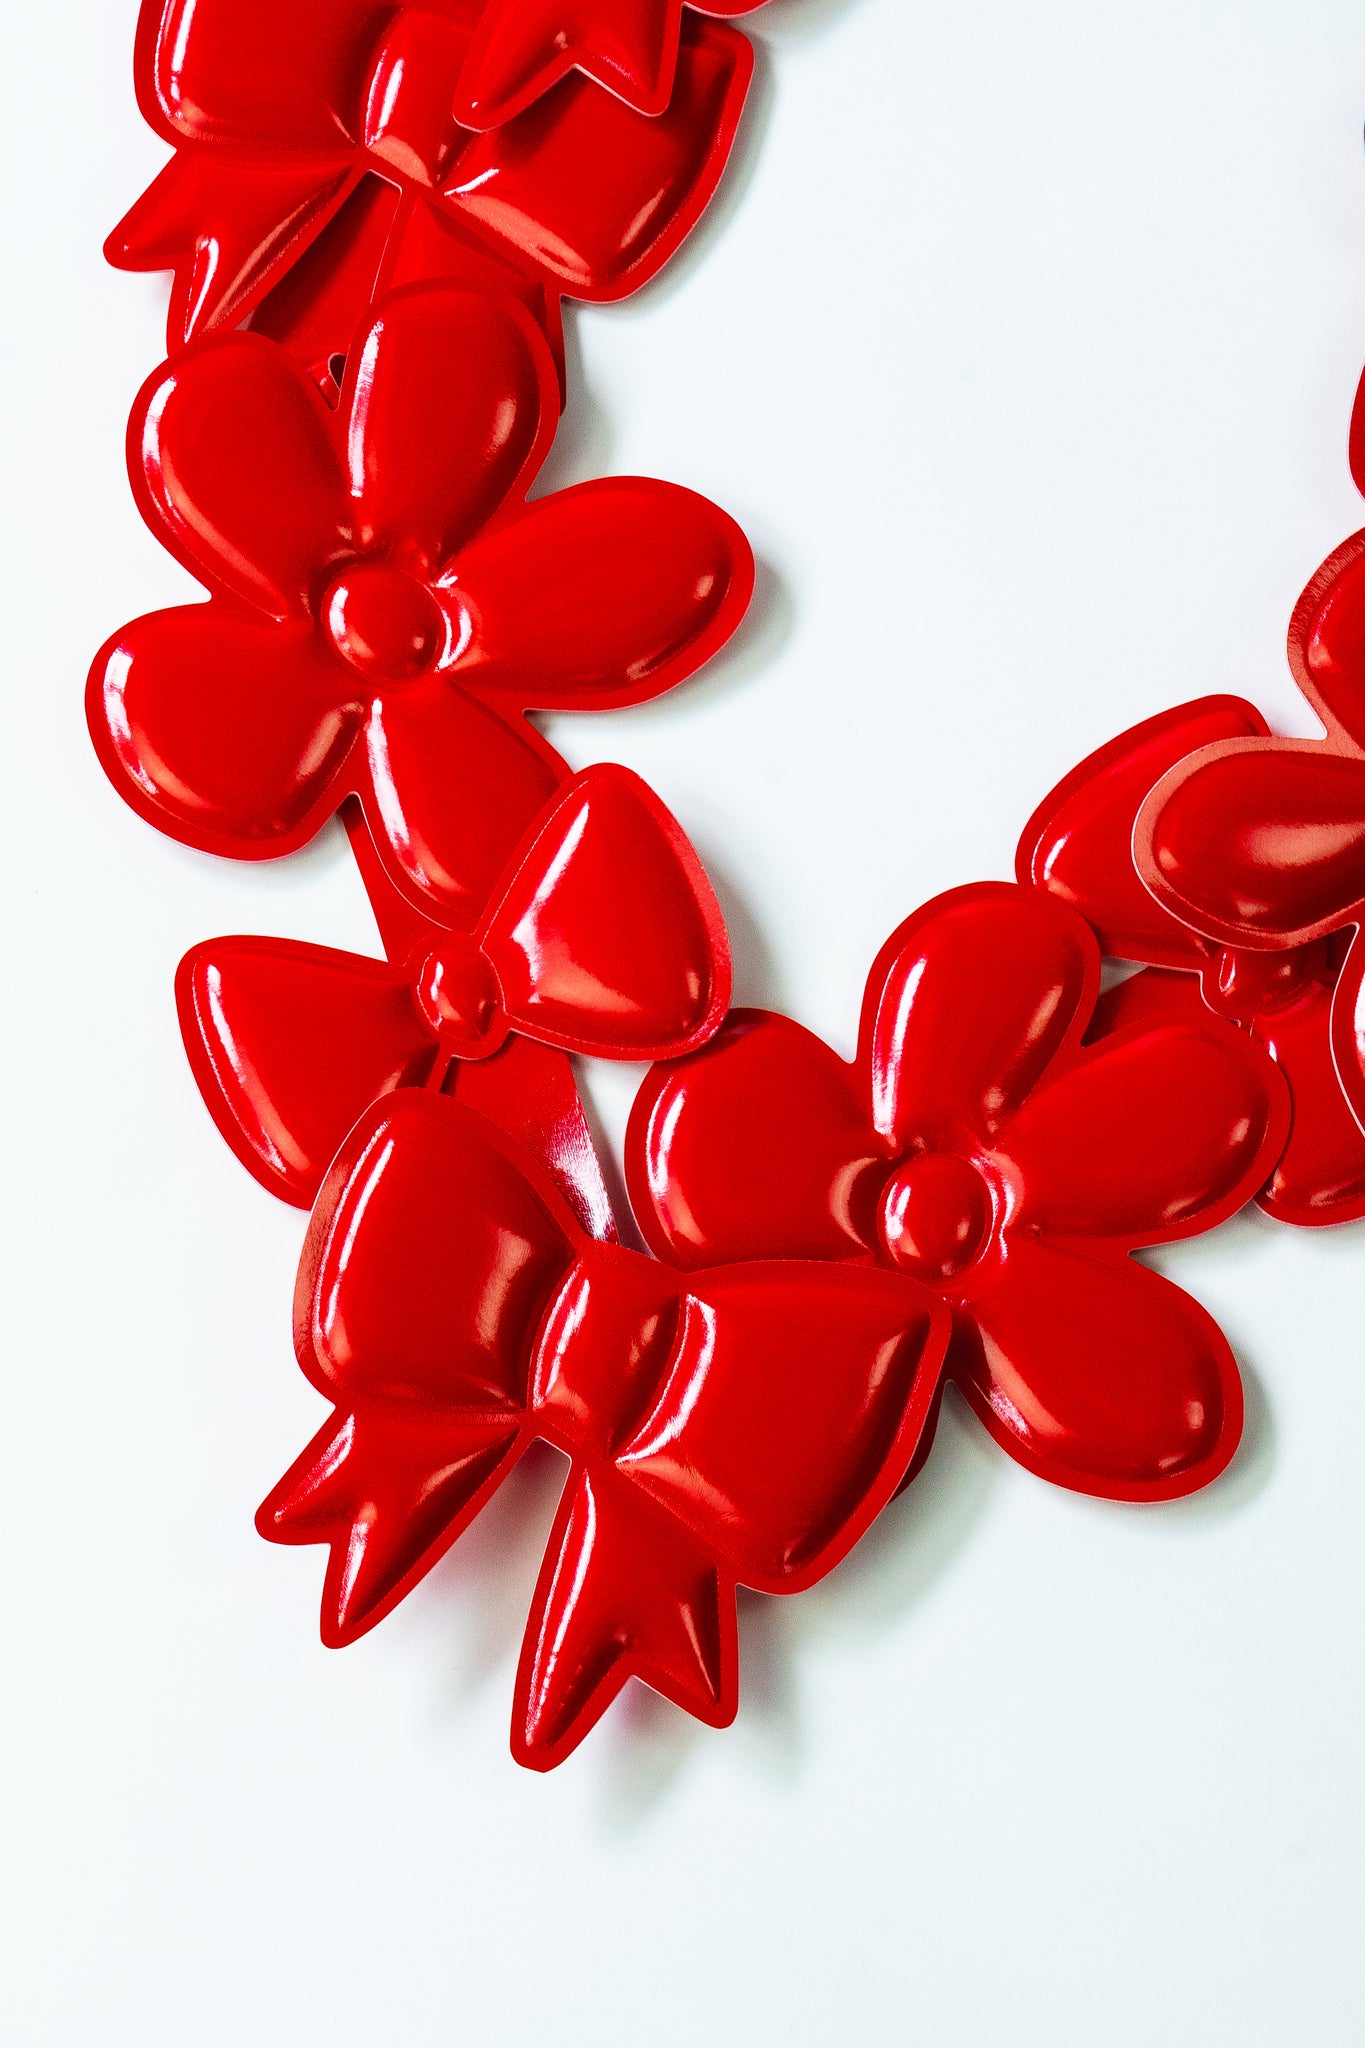 Polyurethane Bow and Flower Necklace Red